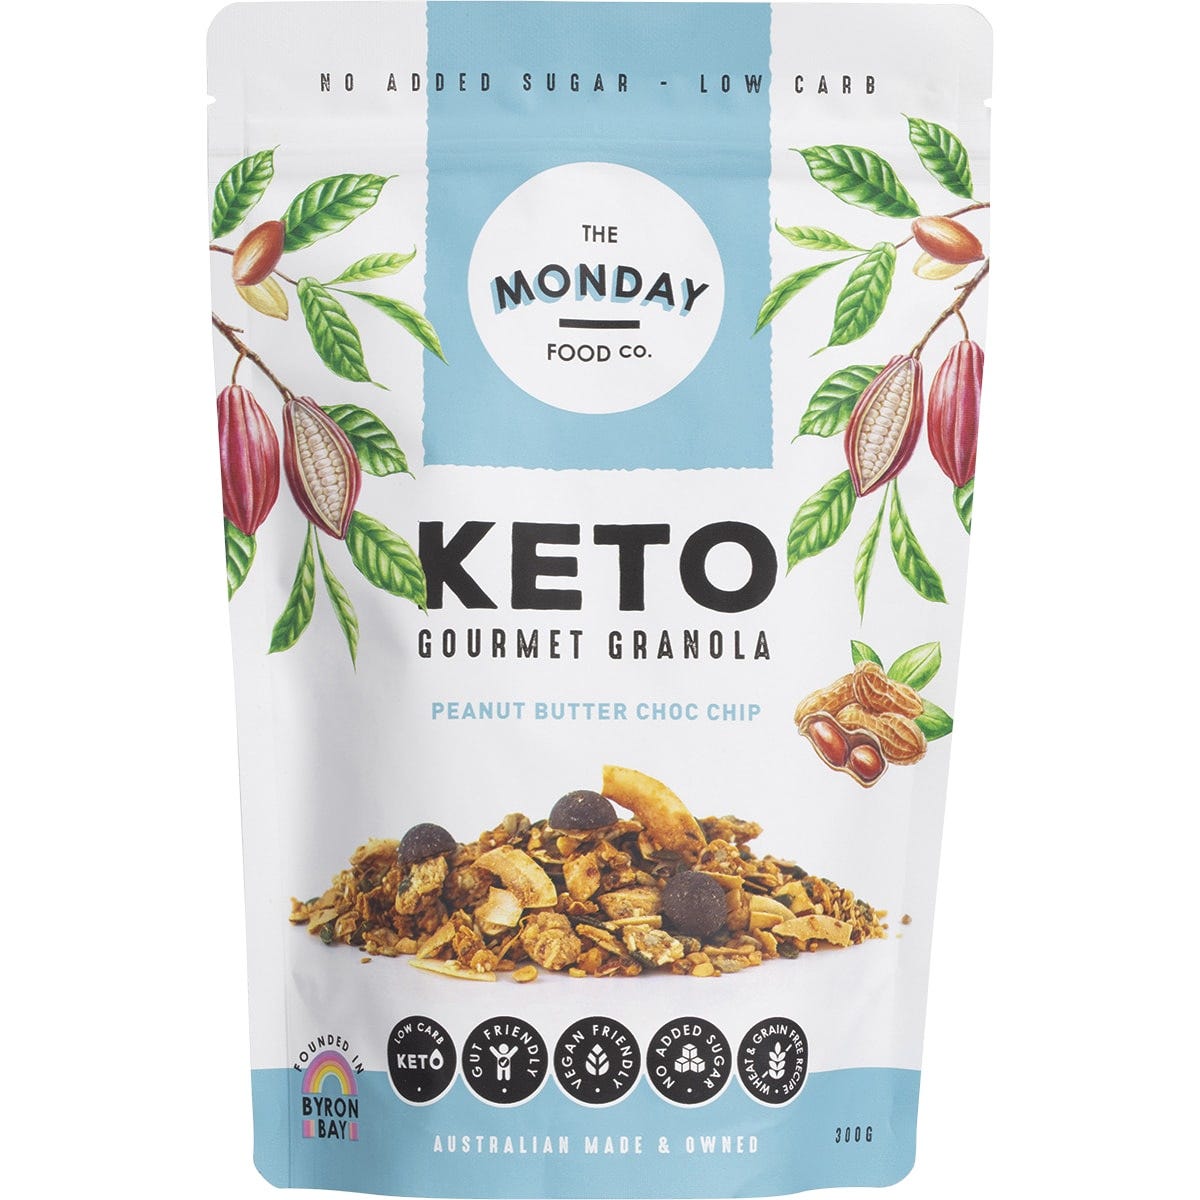 The Monday Food Co. Keto Gourmet Granola Peanut Butter Chocolate Chip 300g - Dr Earth - Breakfast